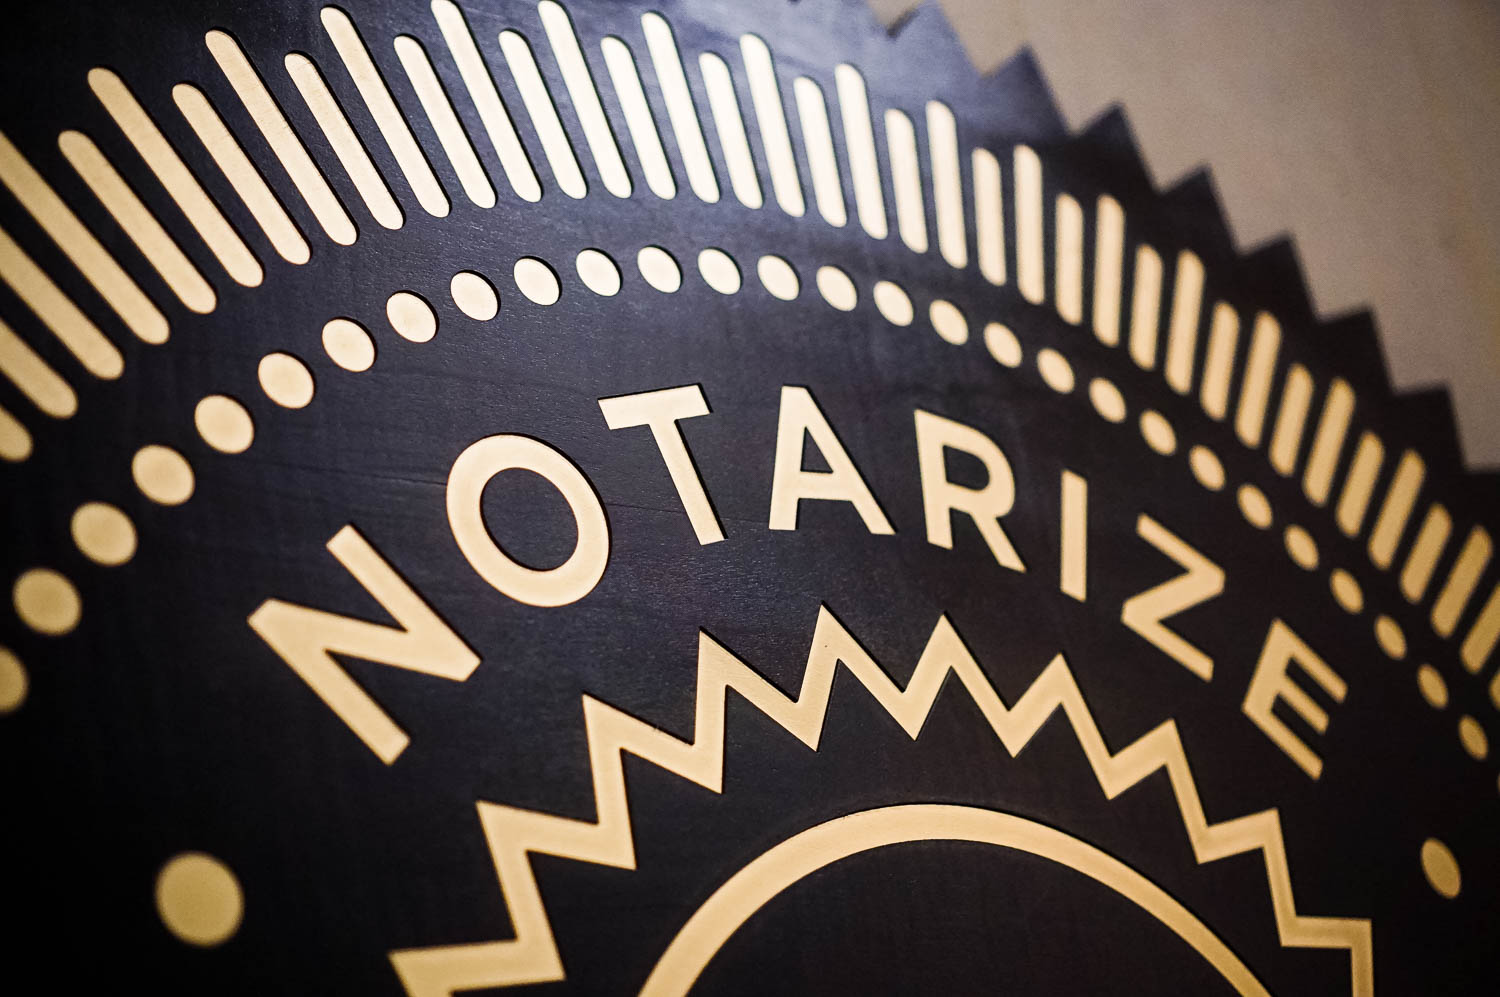 Notarize sign